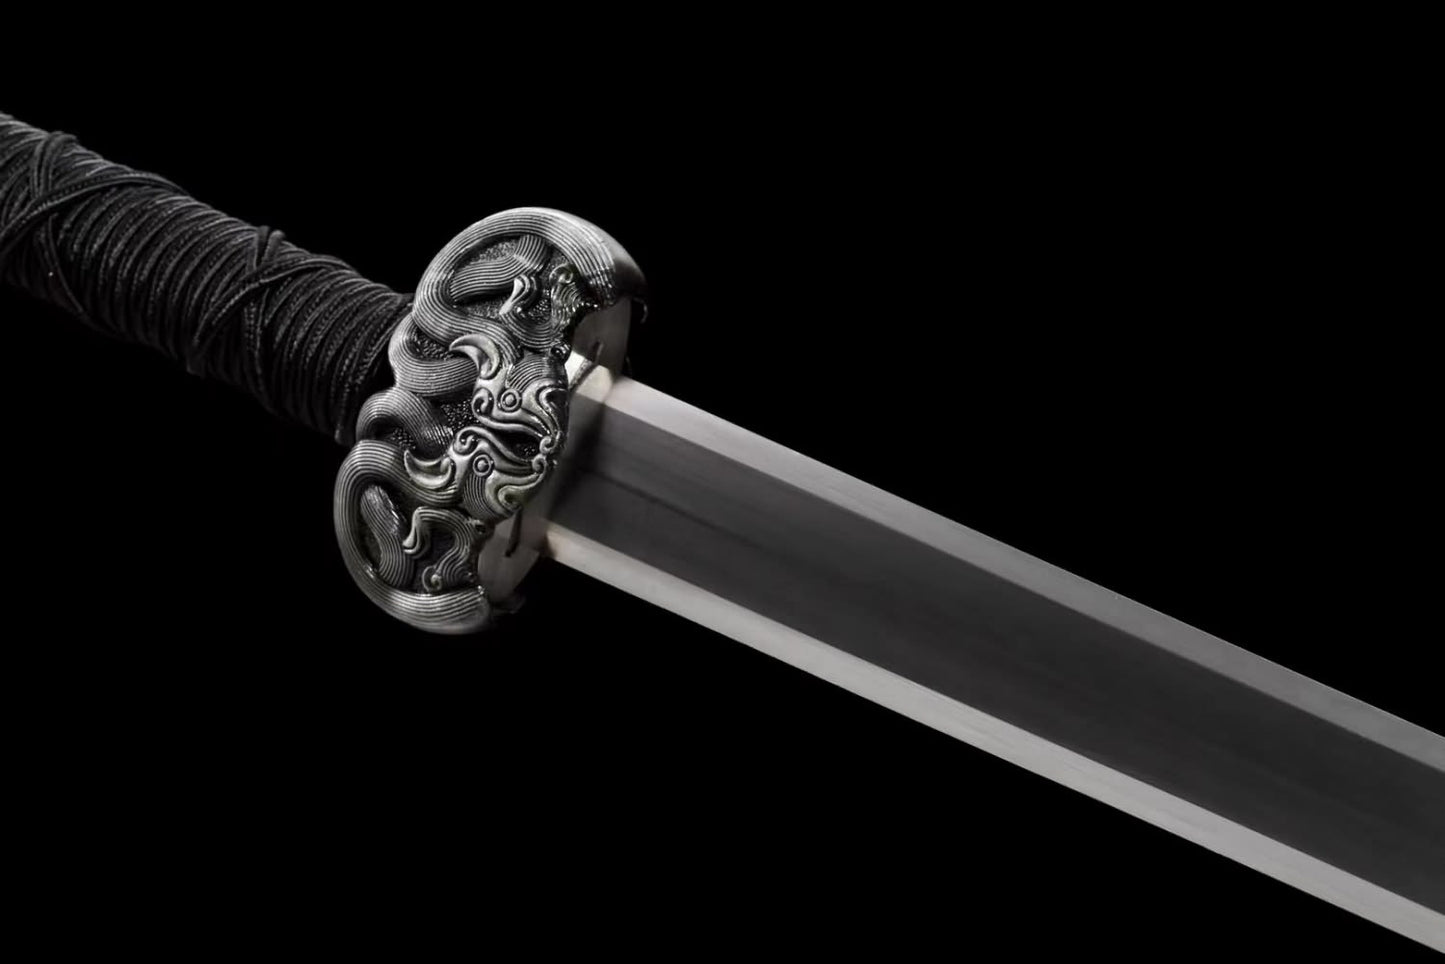 Chinese sword,Han jian High Carbon Steel octahedral Blade,Alloy Fittings,Solid Wood+Fake Leather